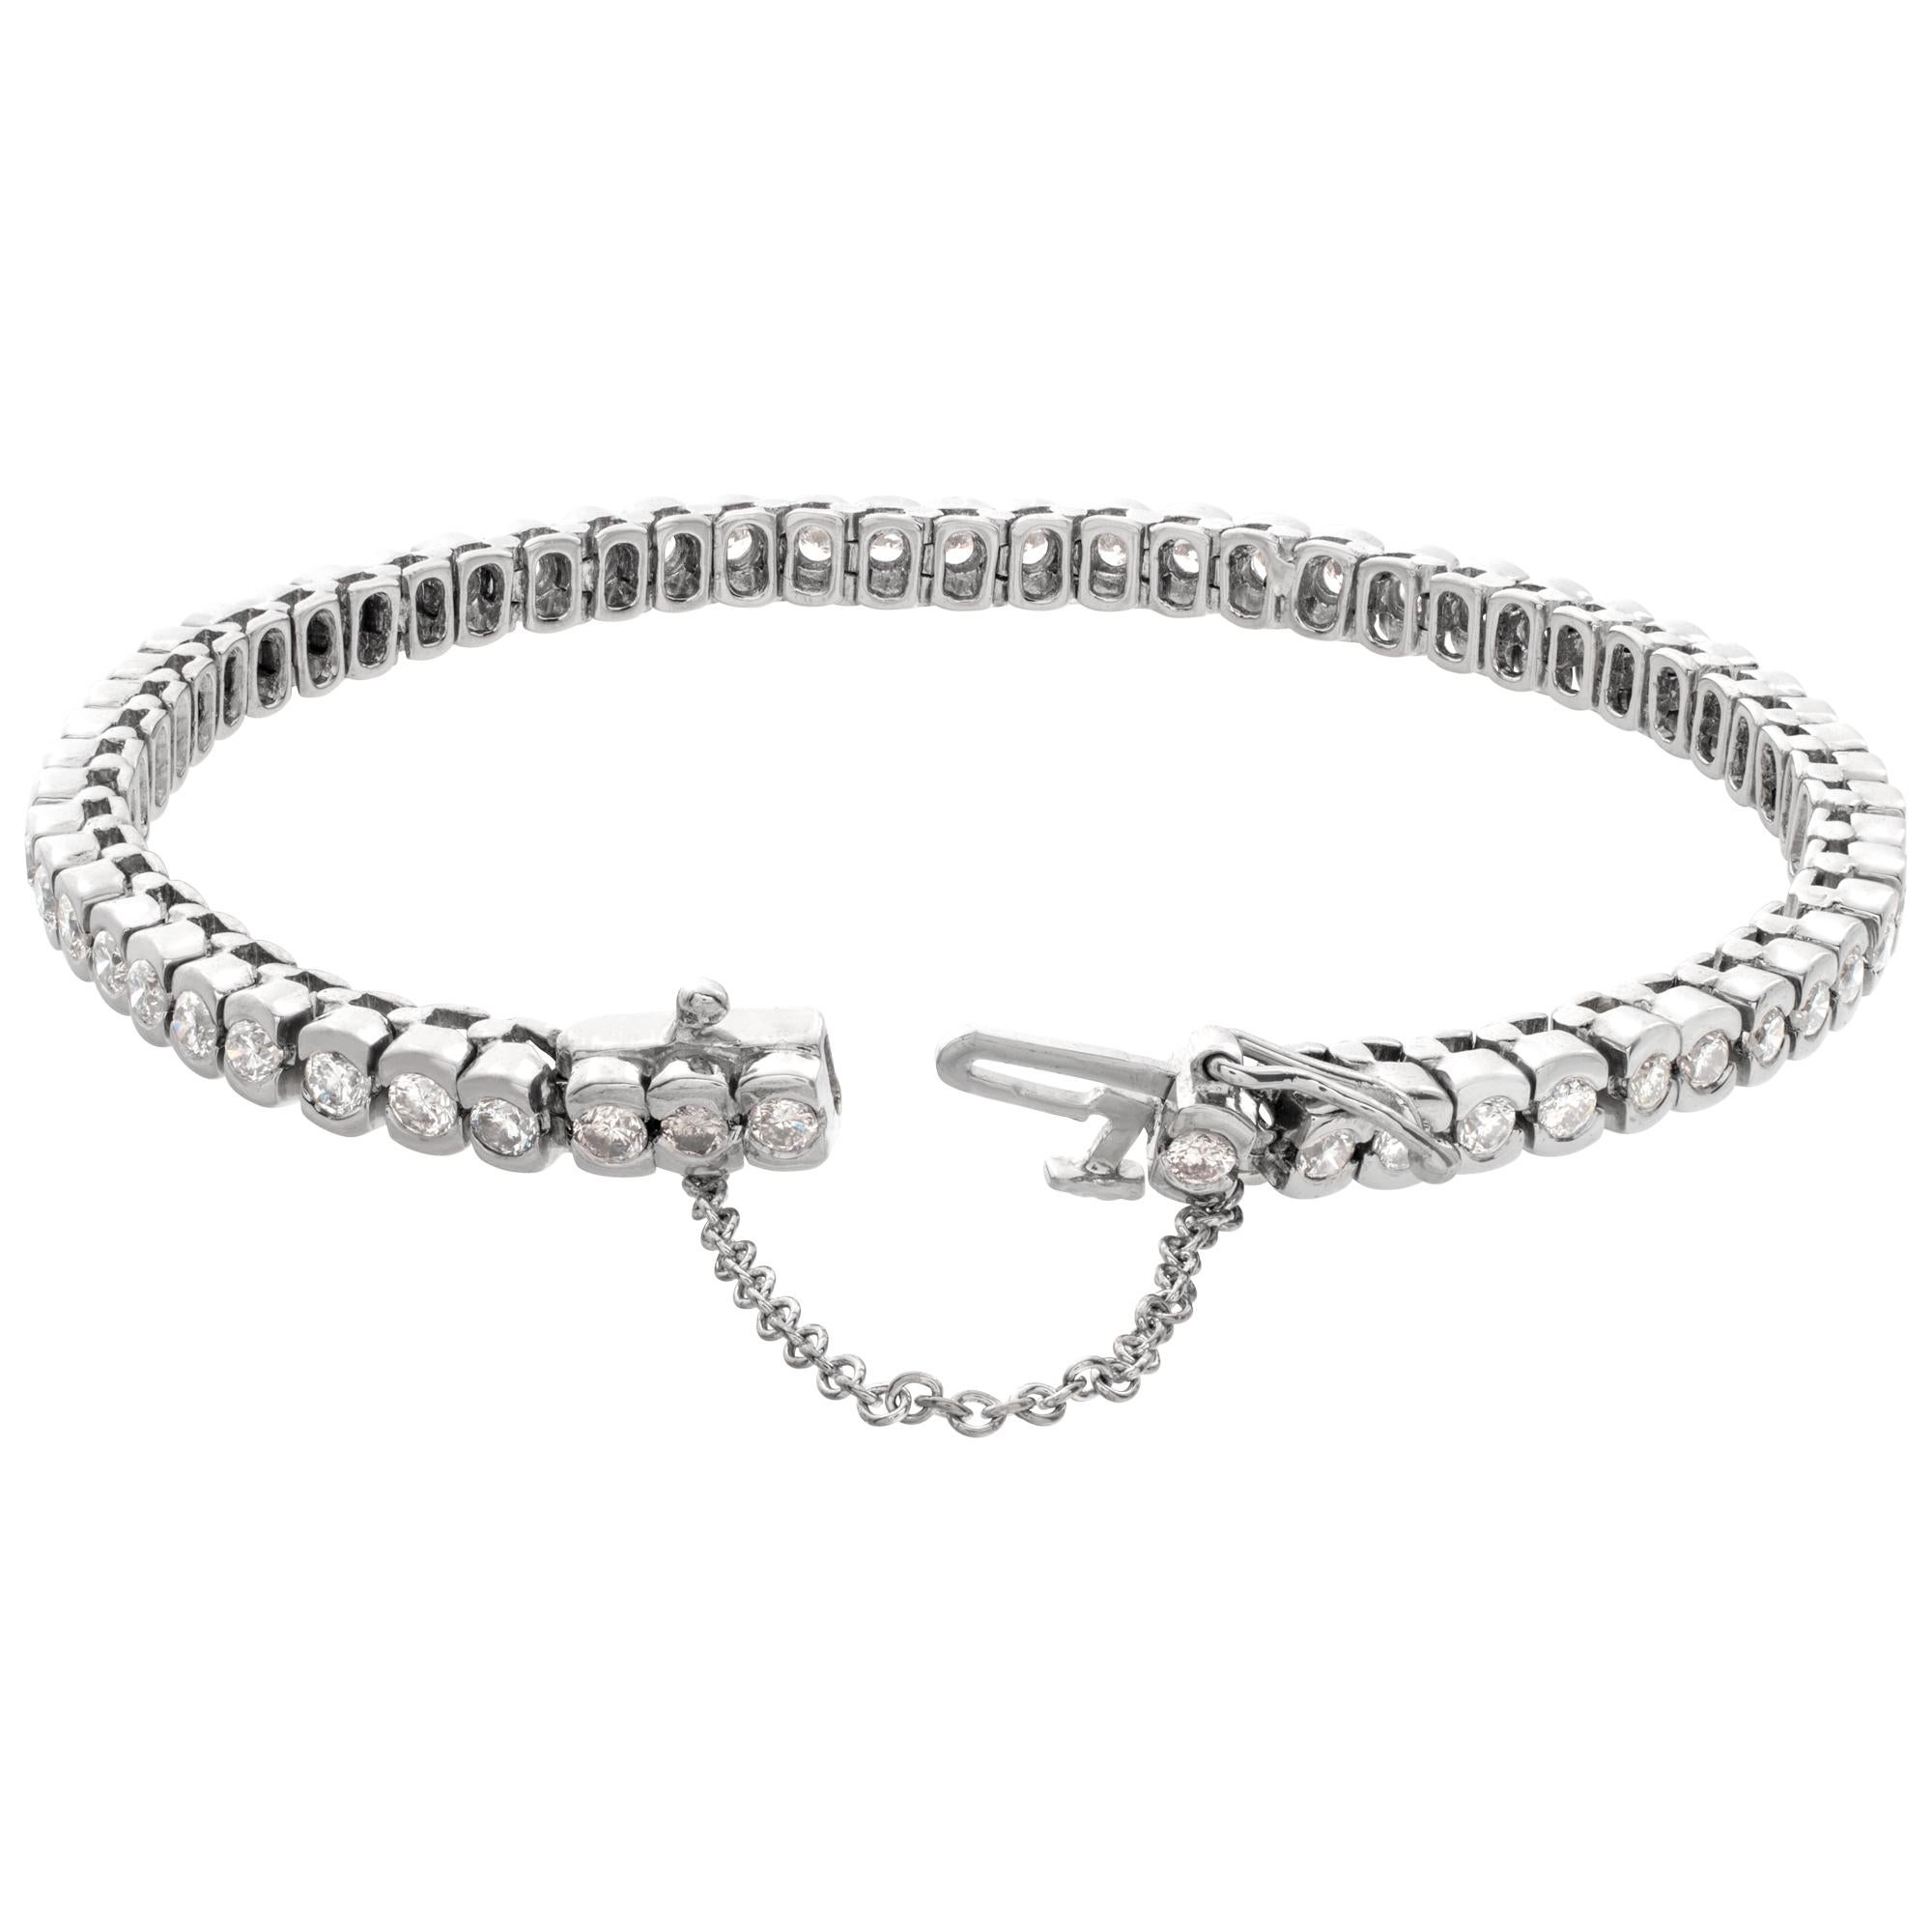 Diamond tennis bracelet in platinum with approximately 6 carats in round diamond In Excellent Condition For Sale In Surfside, FL